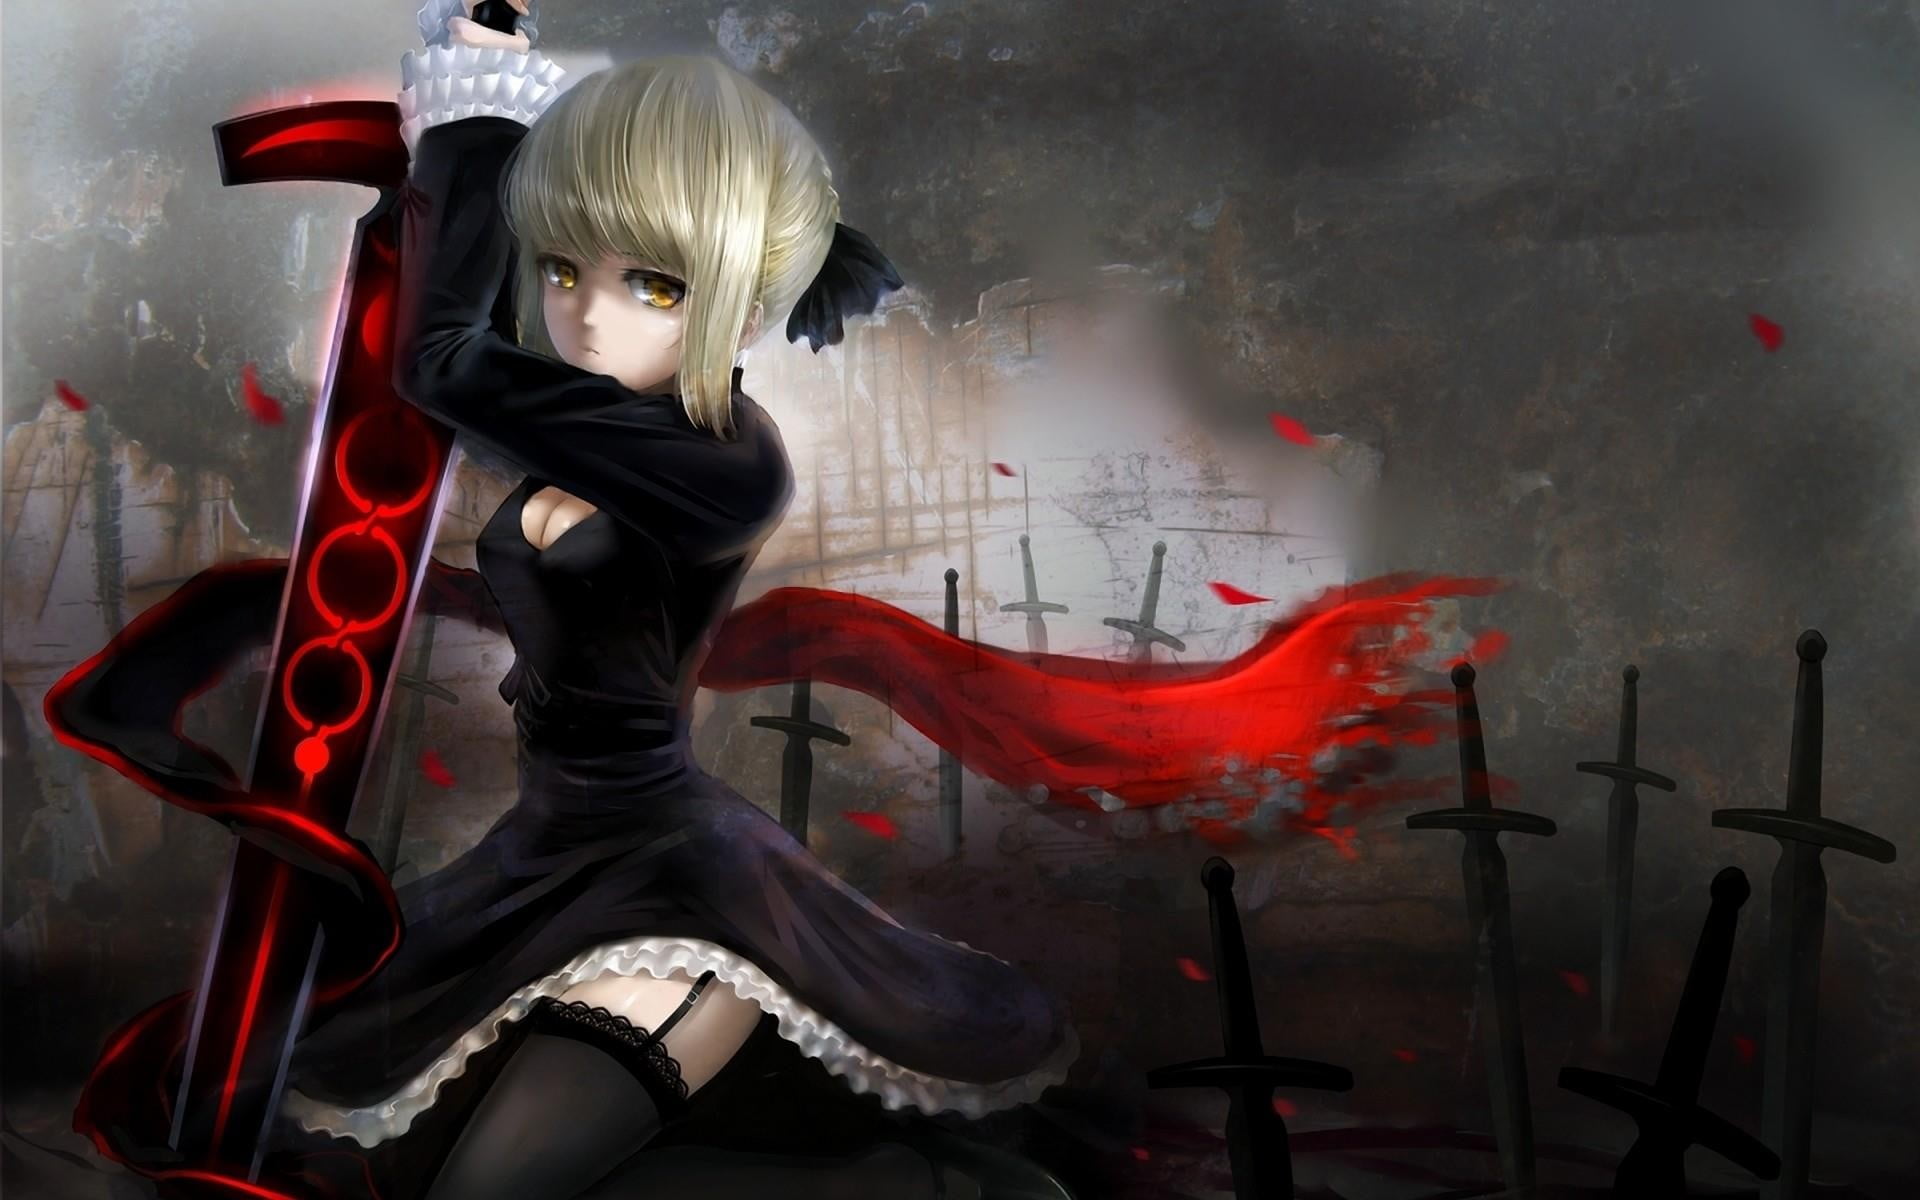 female anime character wallpaper, Saber Alter, Fate Series, one person